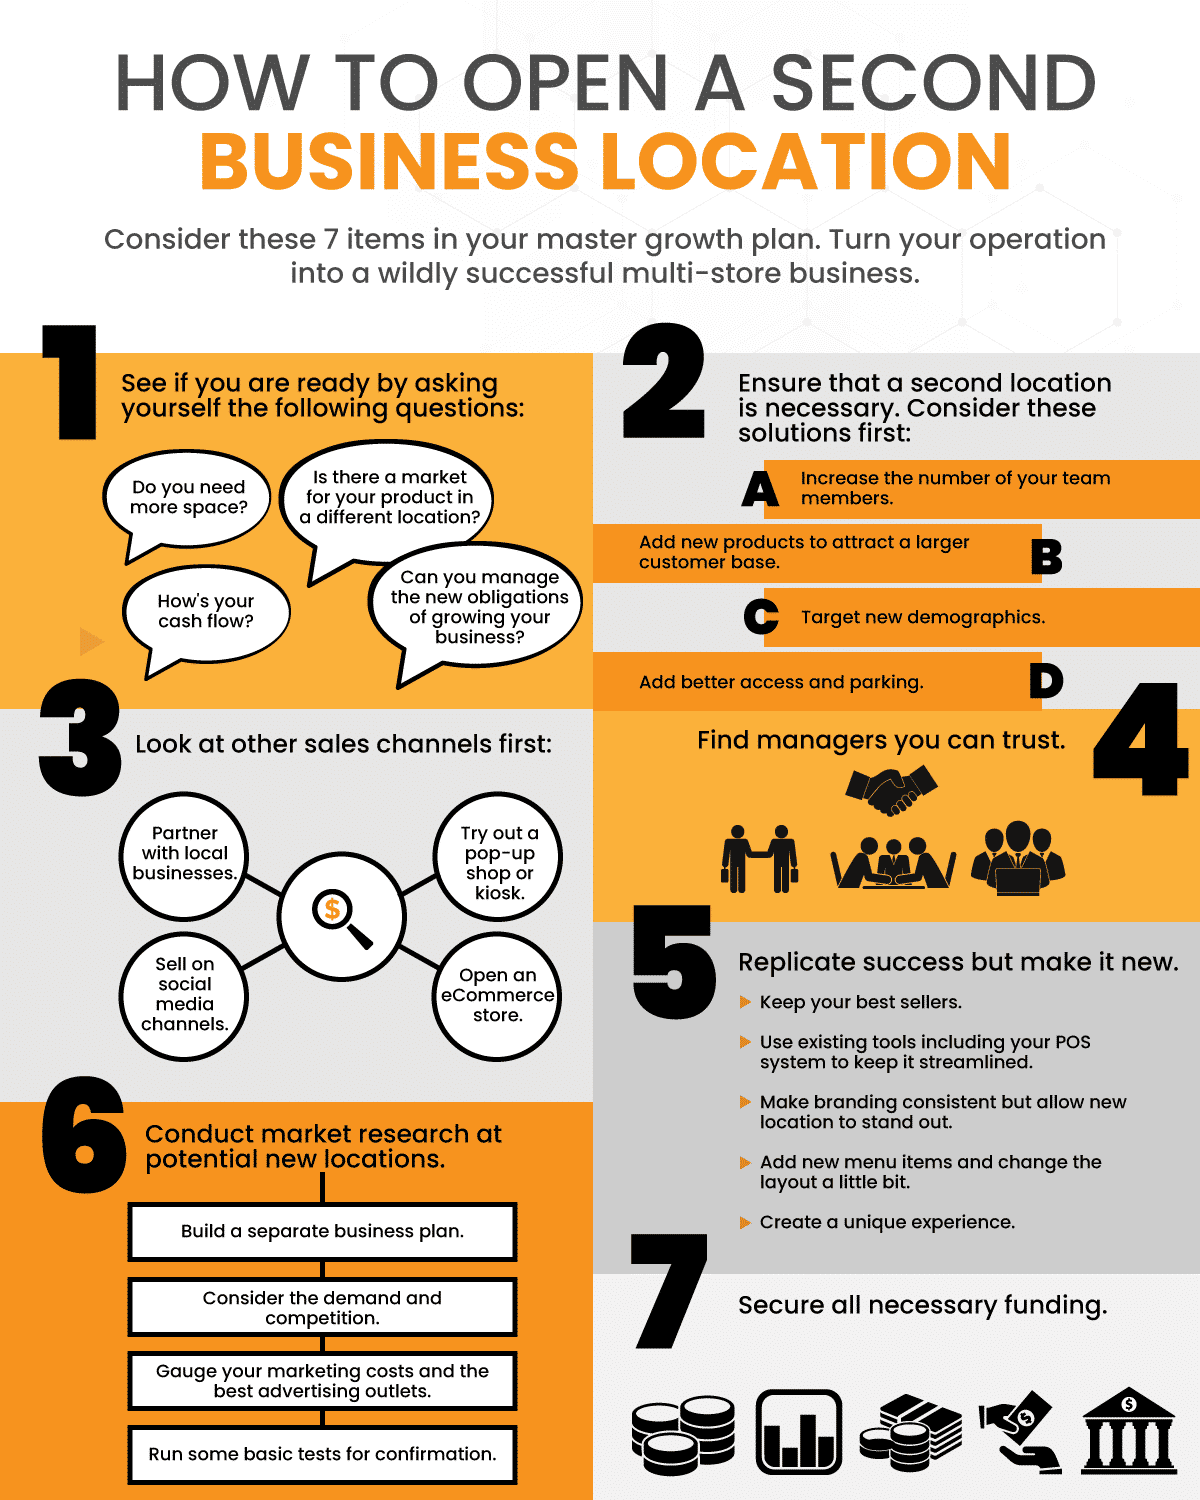 How to open a second business location infographic in 7 steps